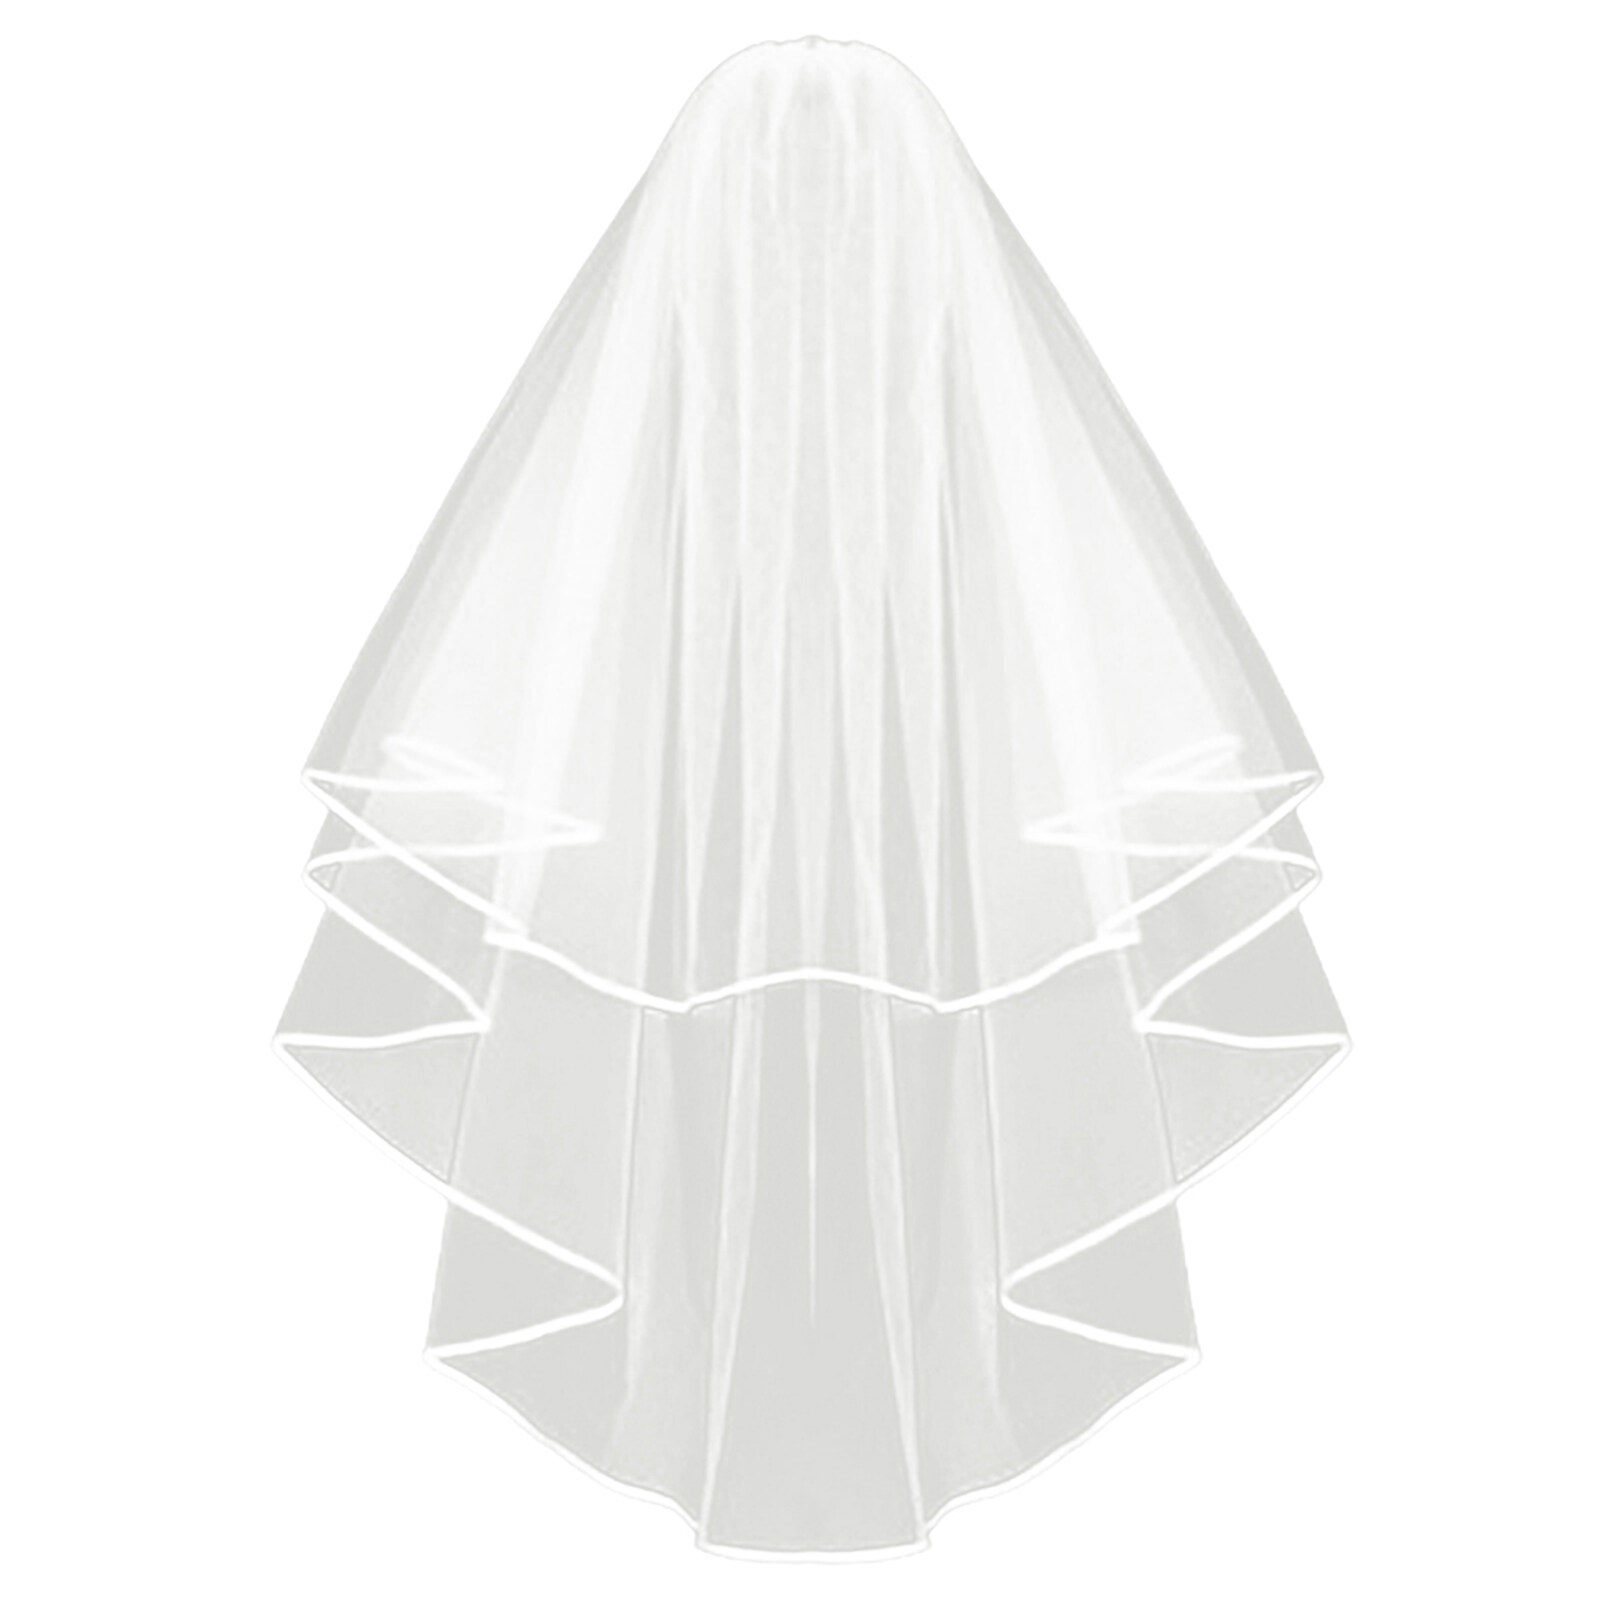 microgood Halloween Black Ghost Bride Veil with Comb Gothic Layered Sheer